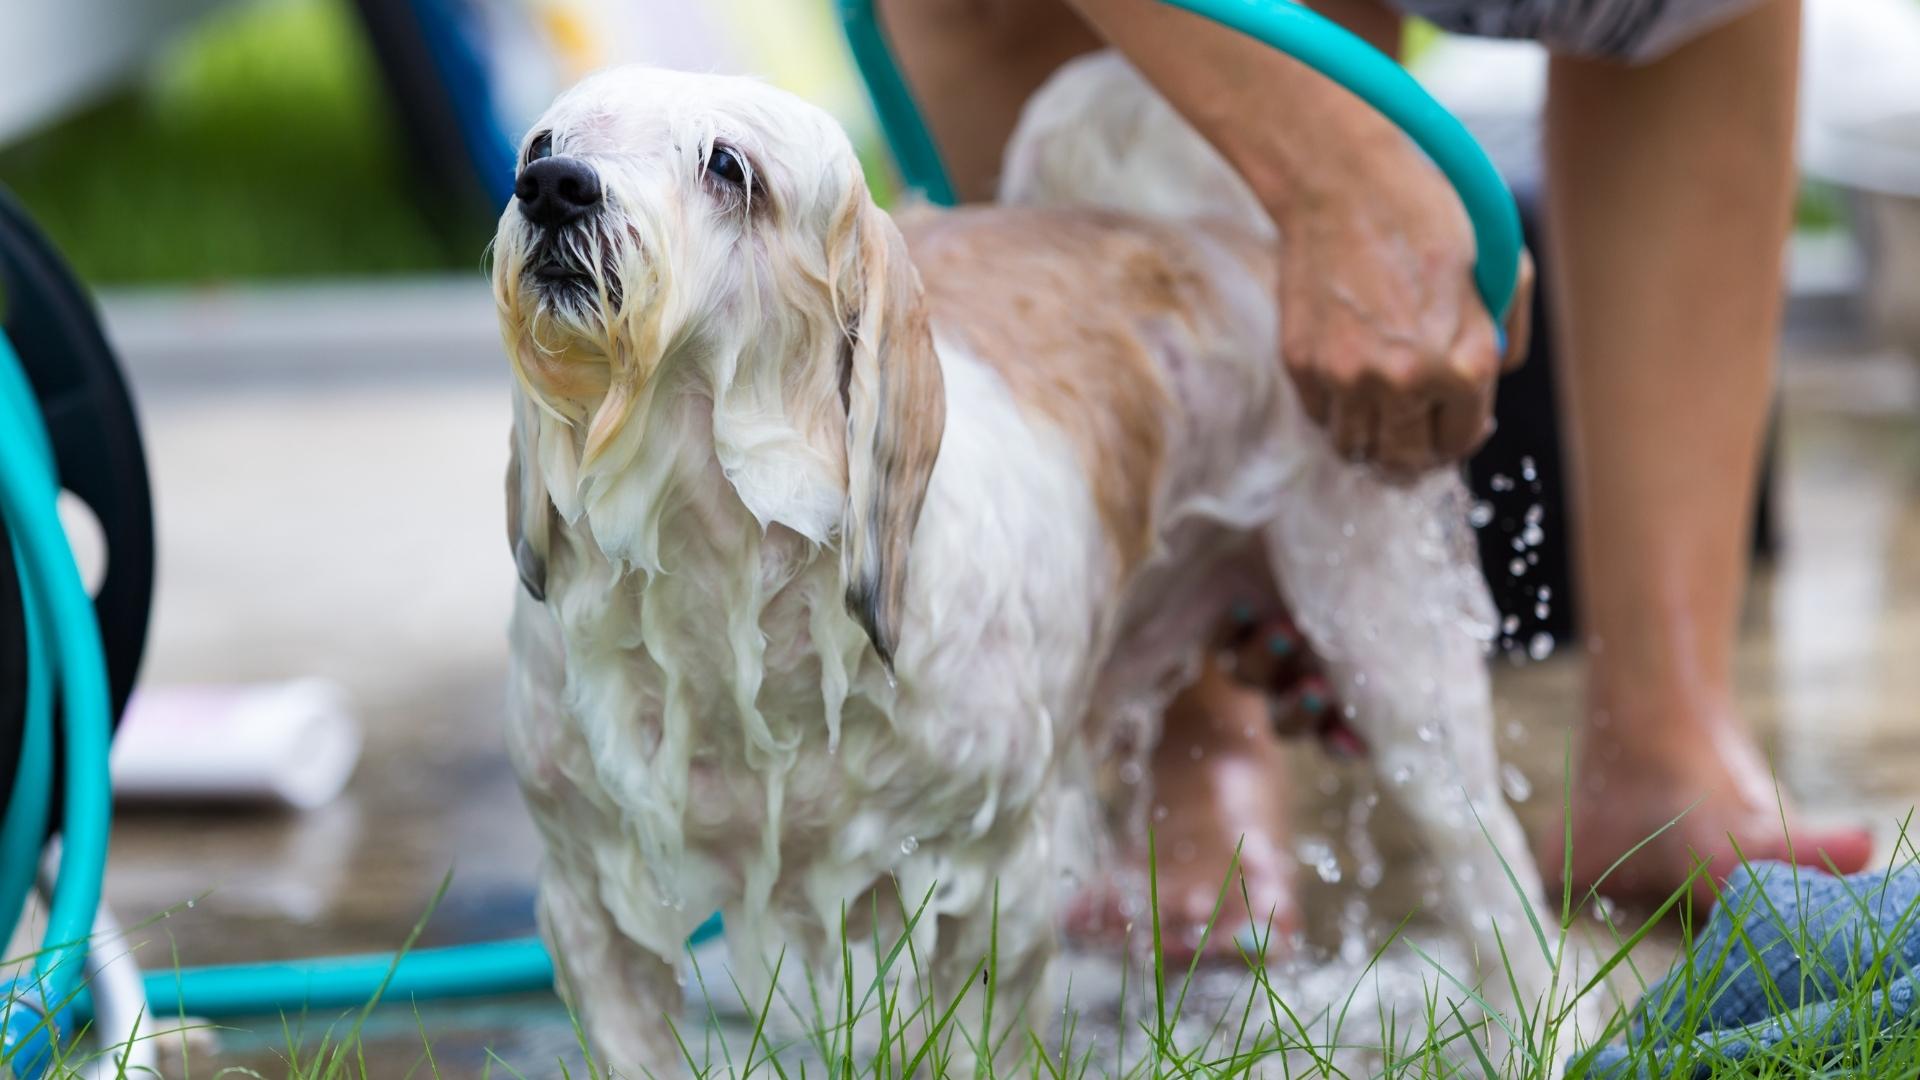 The ability to wash pets outside is a great advantage of an RV outdoor shower.